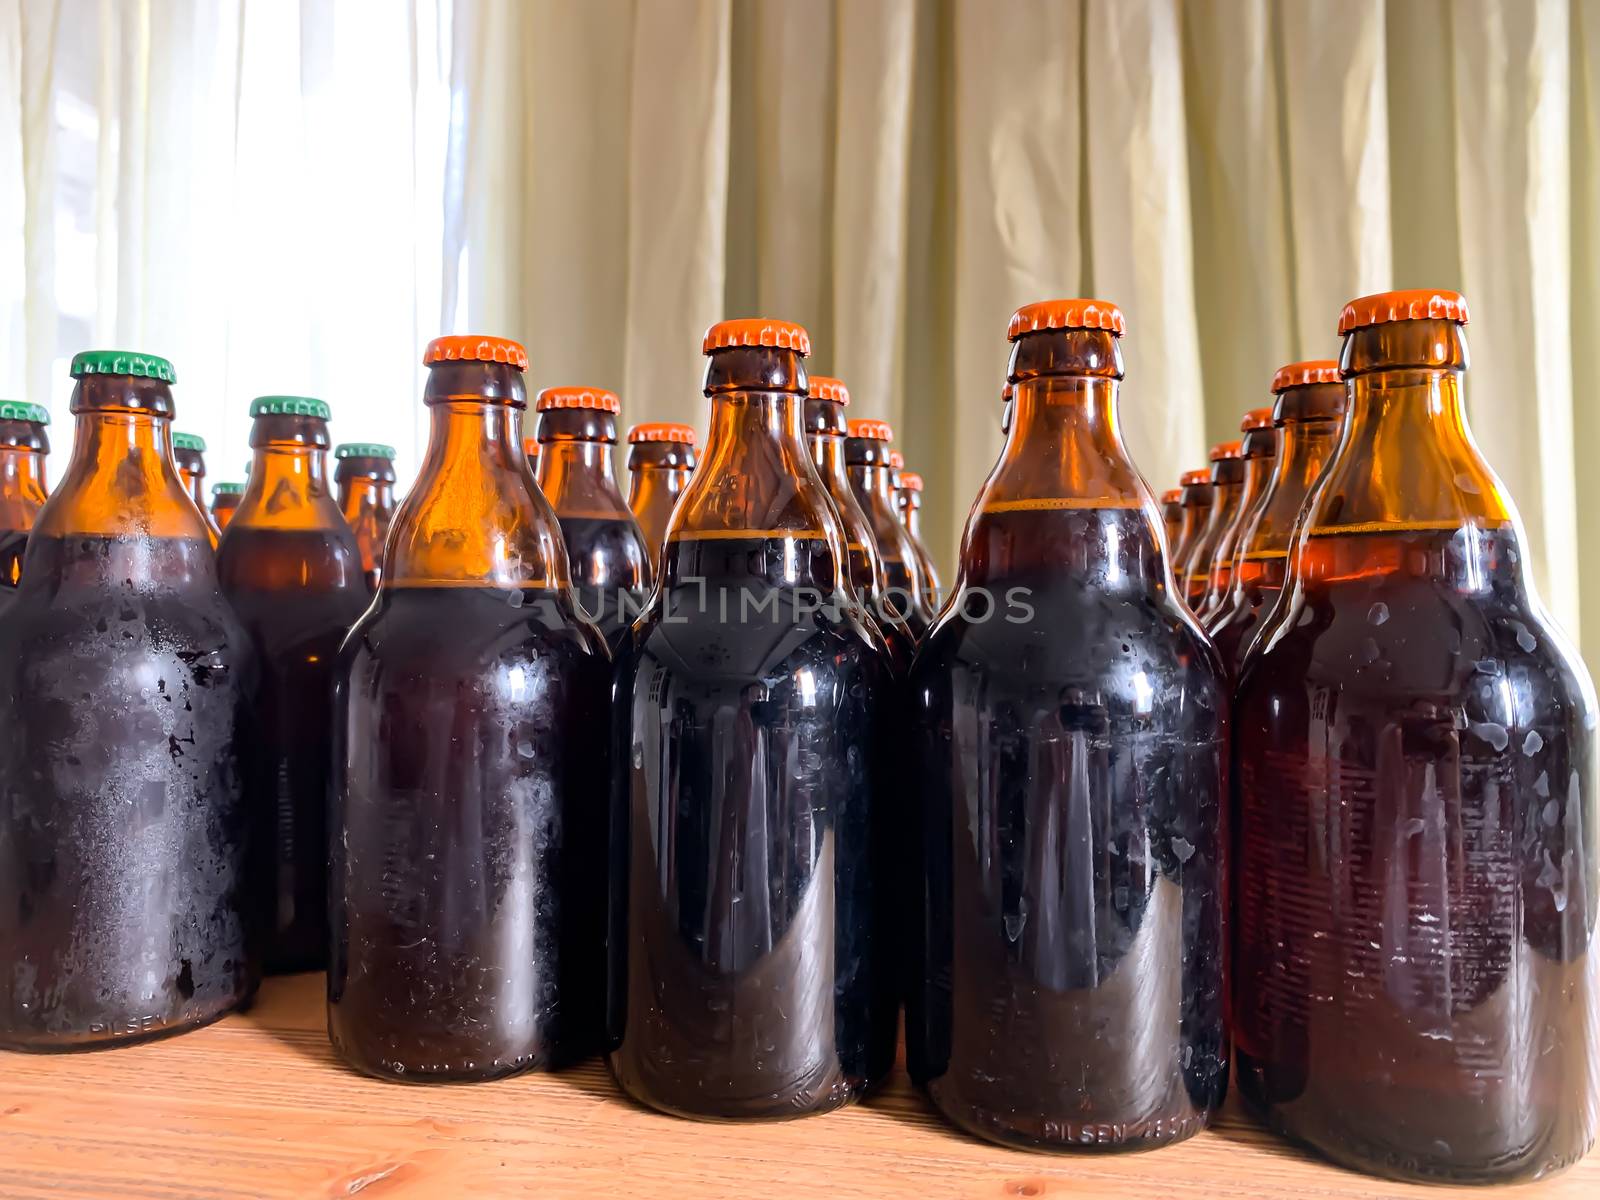 Home made fresh craft beer bottles on a wooden table. Close up rows of beer bottles with orange caps horizontal image. Self made beer brewery at home